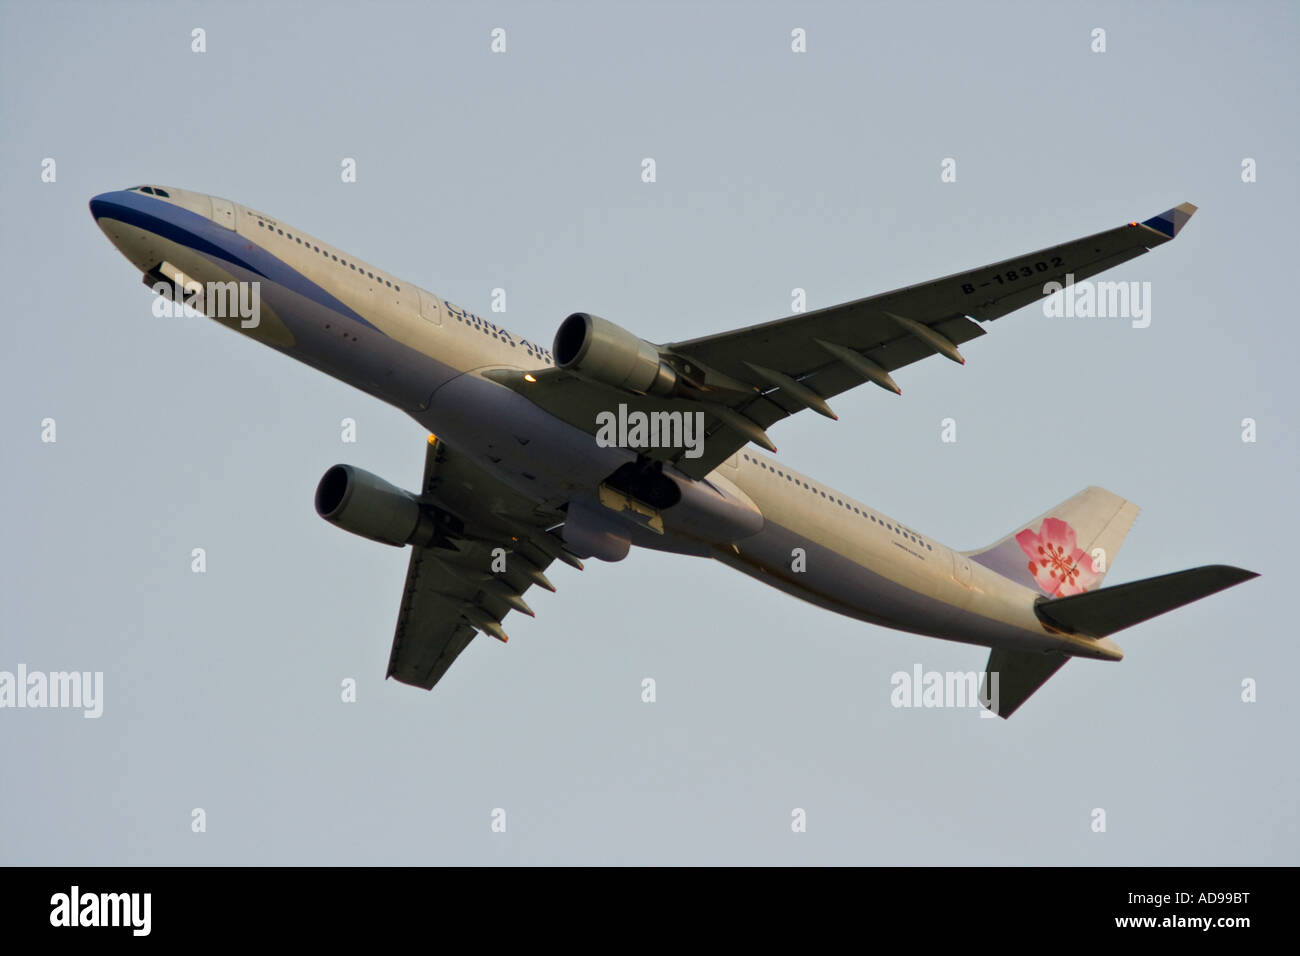 China Airlines Airbus A340 Passenger Jet in the Air Just after Takeoff Stock Photo